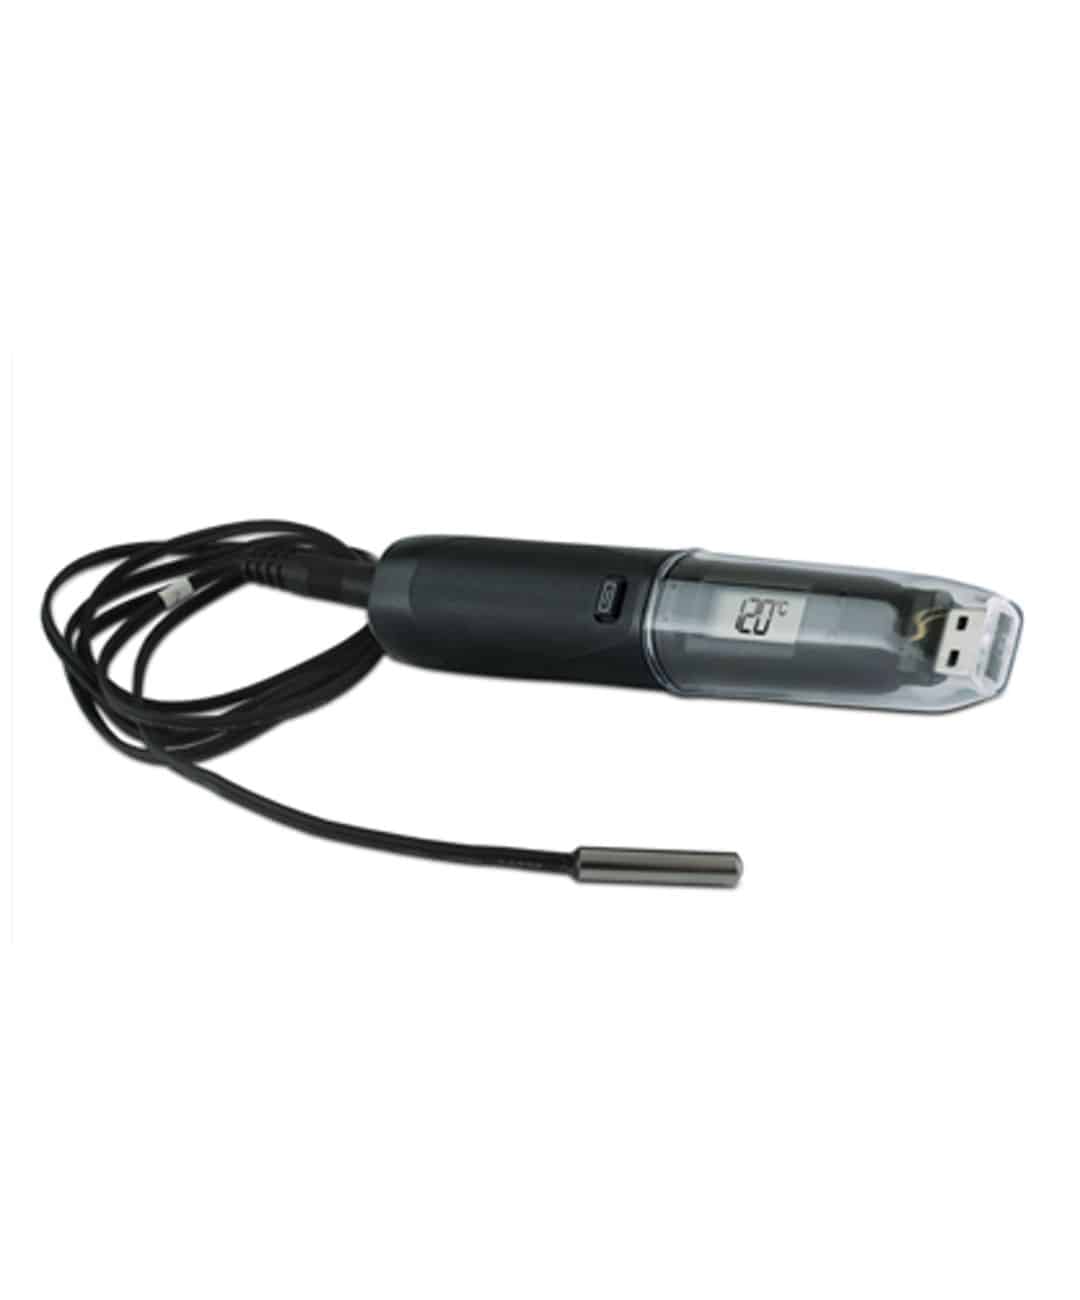 USB Temperature Data Logger with Probe (TMM120DP) -40°C to 125°C